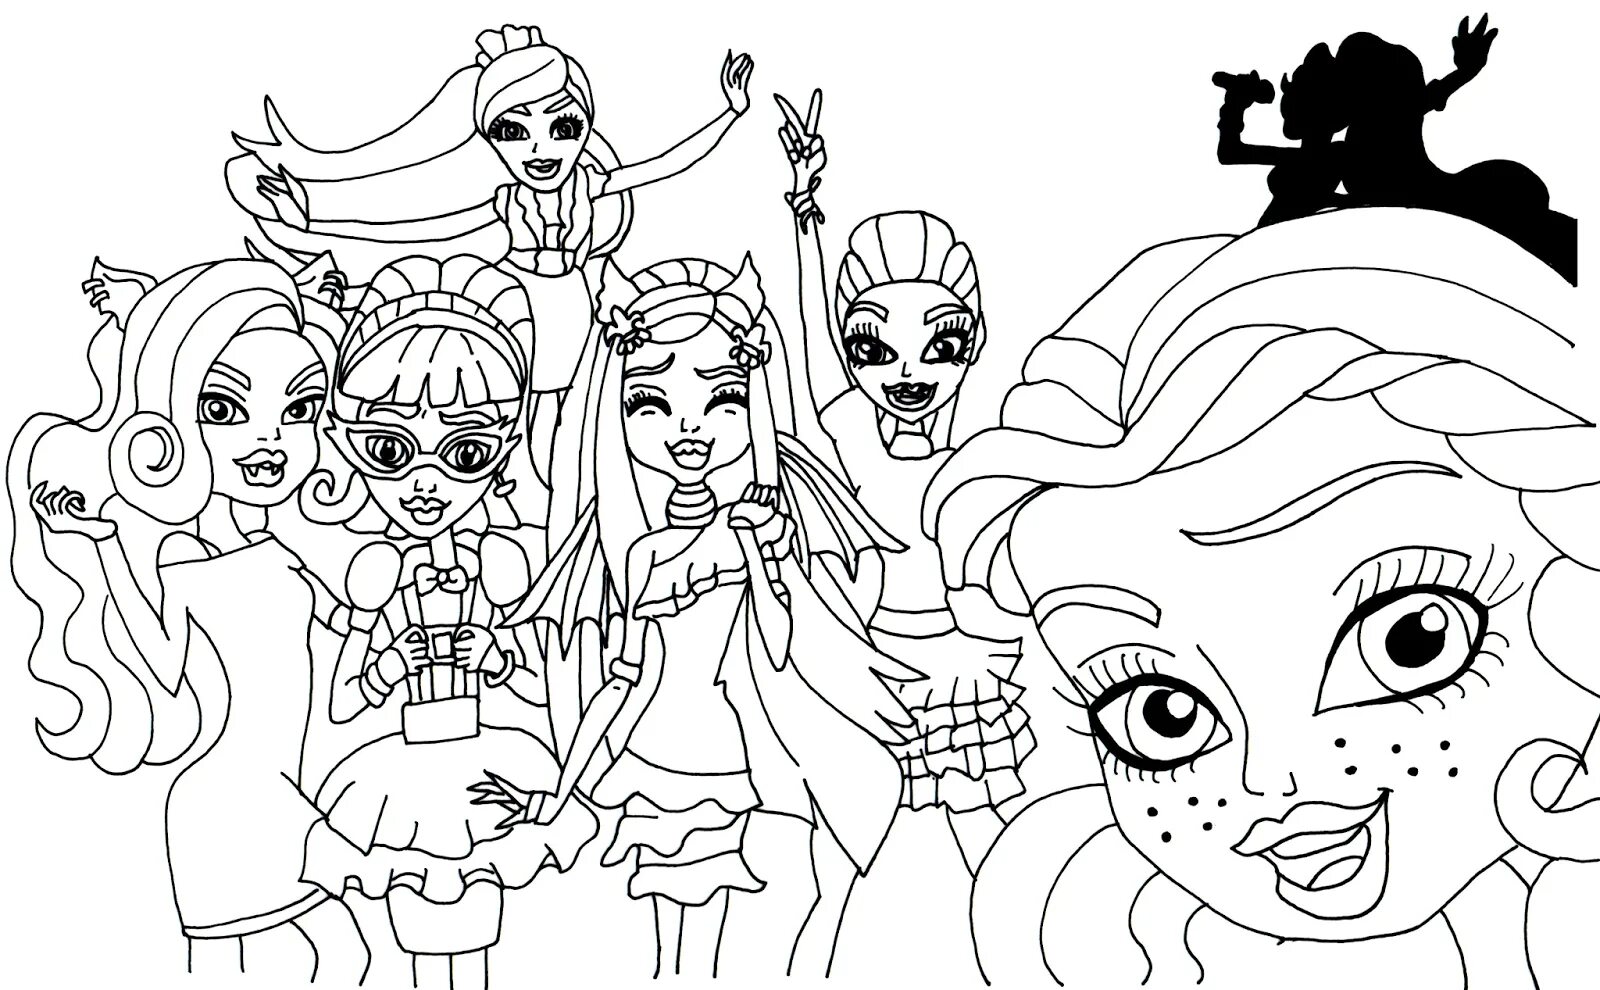 Stylish monster high coloring book for girls